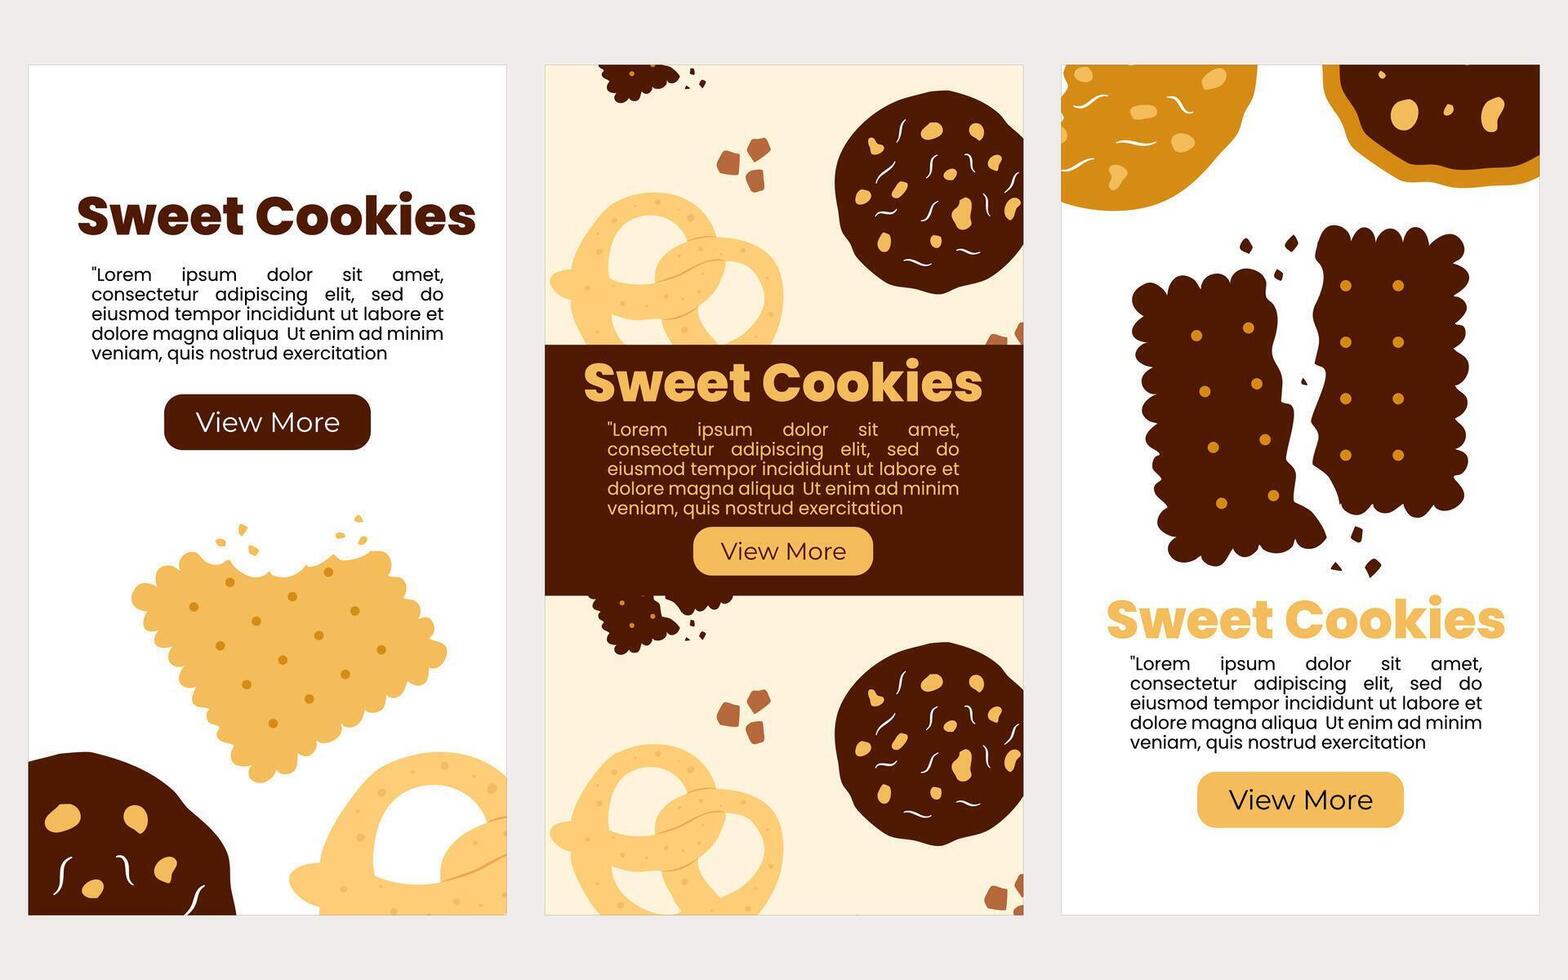 Cookie social media banners template. Poster, cover with hand drawn element vector illustration